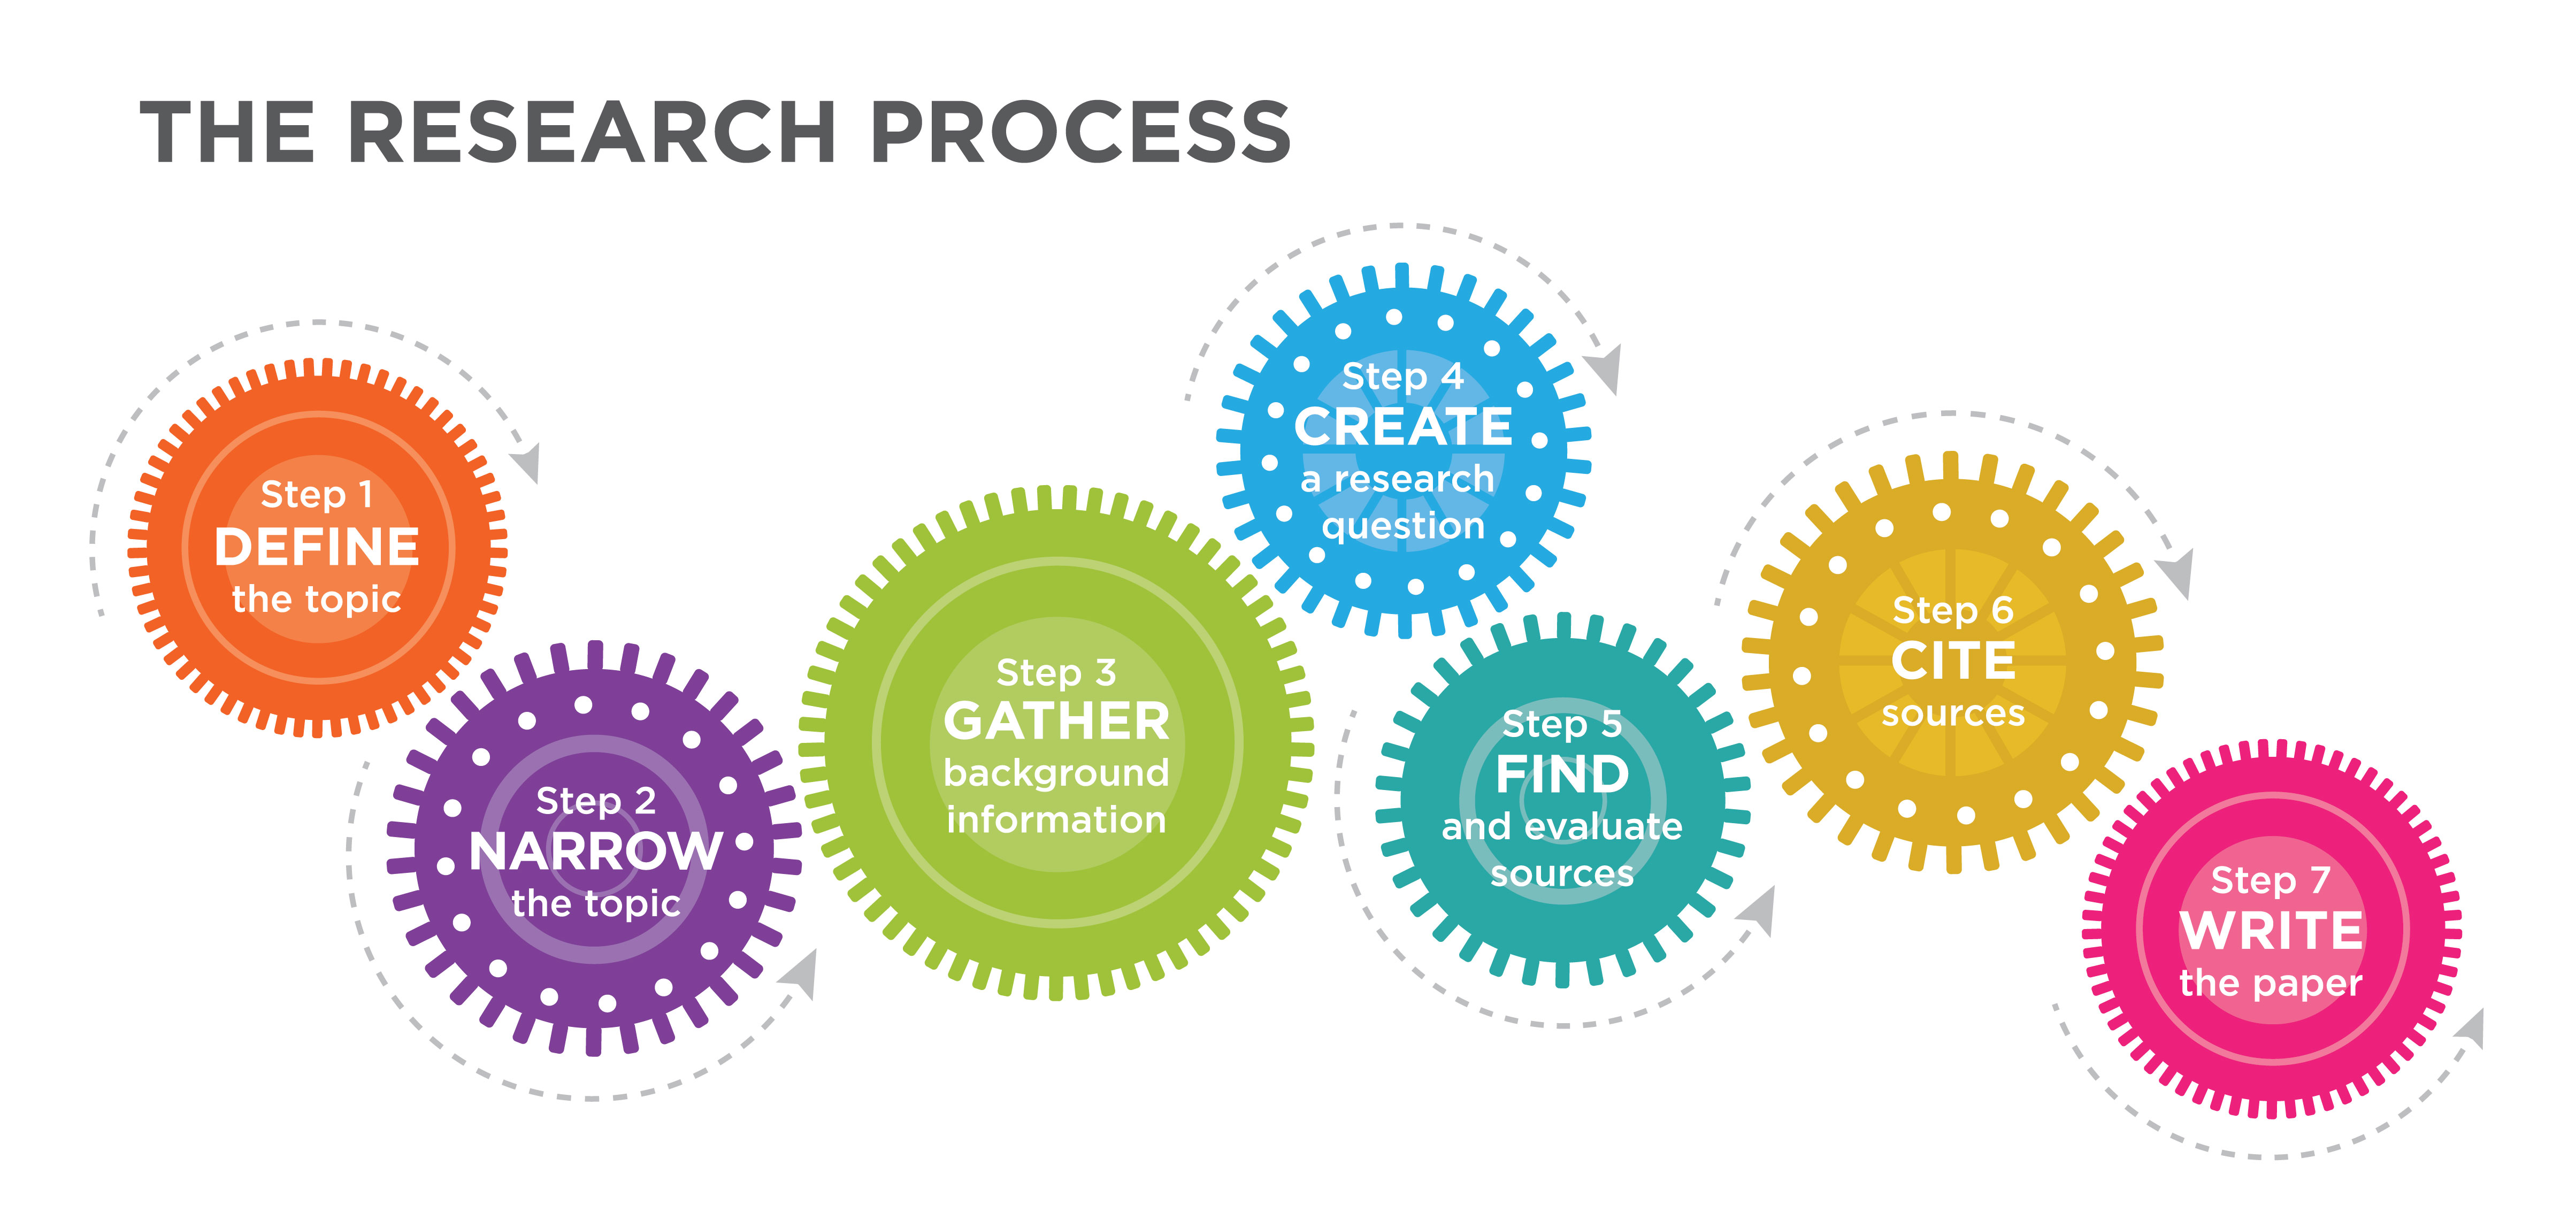 Research-process-graphic-final.jpg